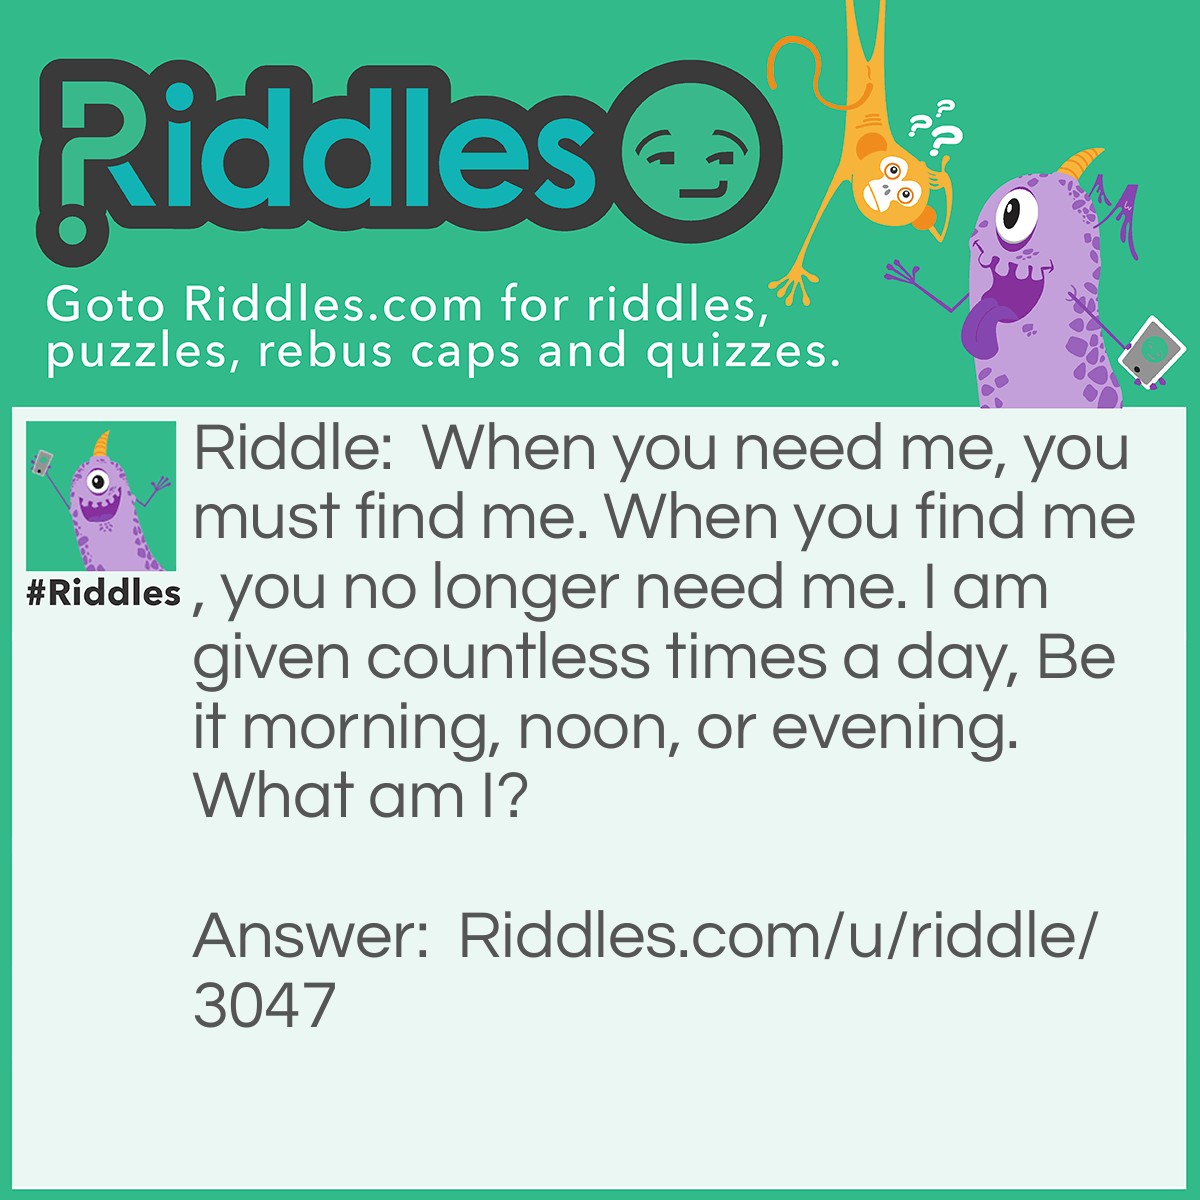 Riddle: When you need me, you must find me. When you find me, you no longer need me. I am given countless times a day, Be it morning, noon, or evening. What am I? Answer: An answer.